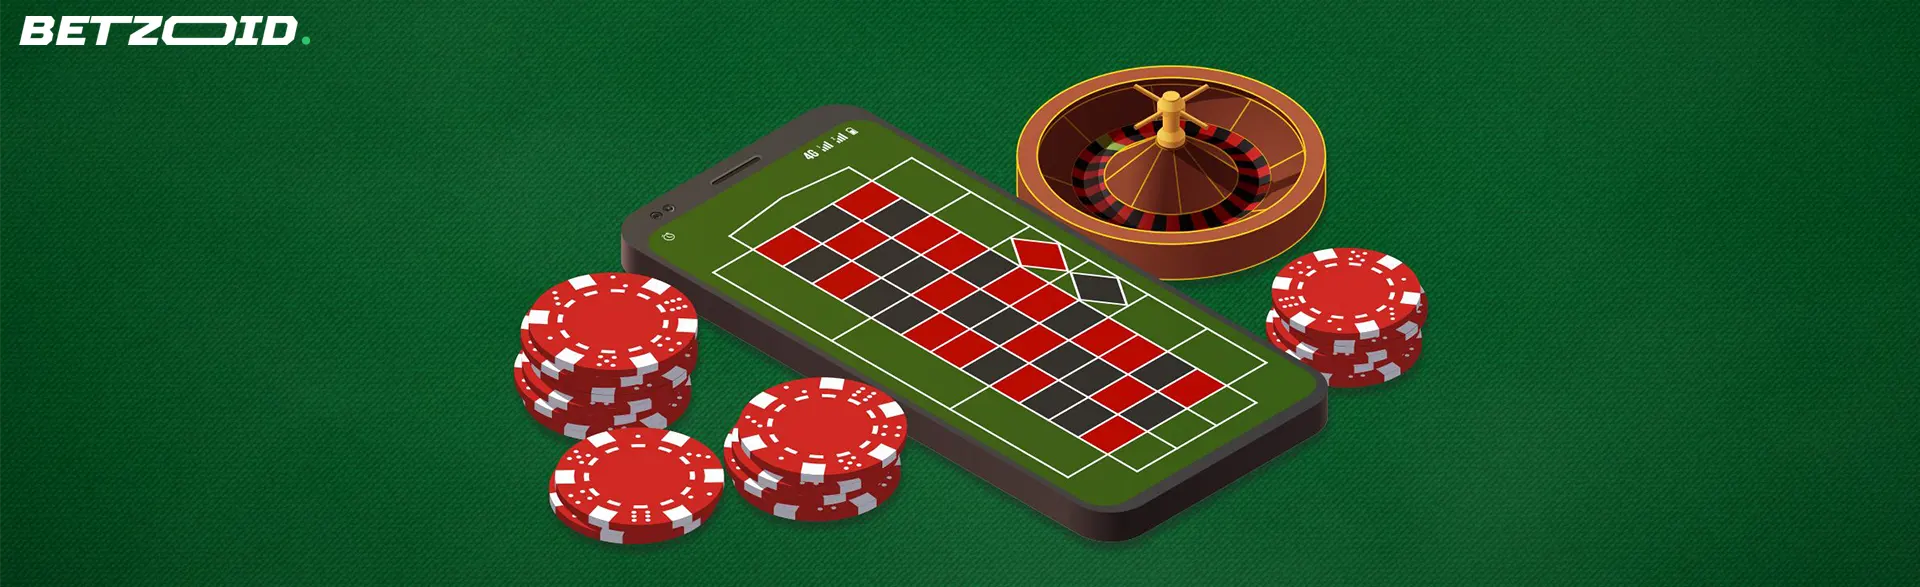 Mobile phone displaying an online roulette game interface alongside roulette chips and a roulette wheel, depicting a no deposit free bonus for online roulette players in Canada.